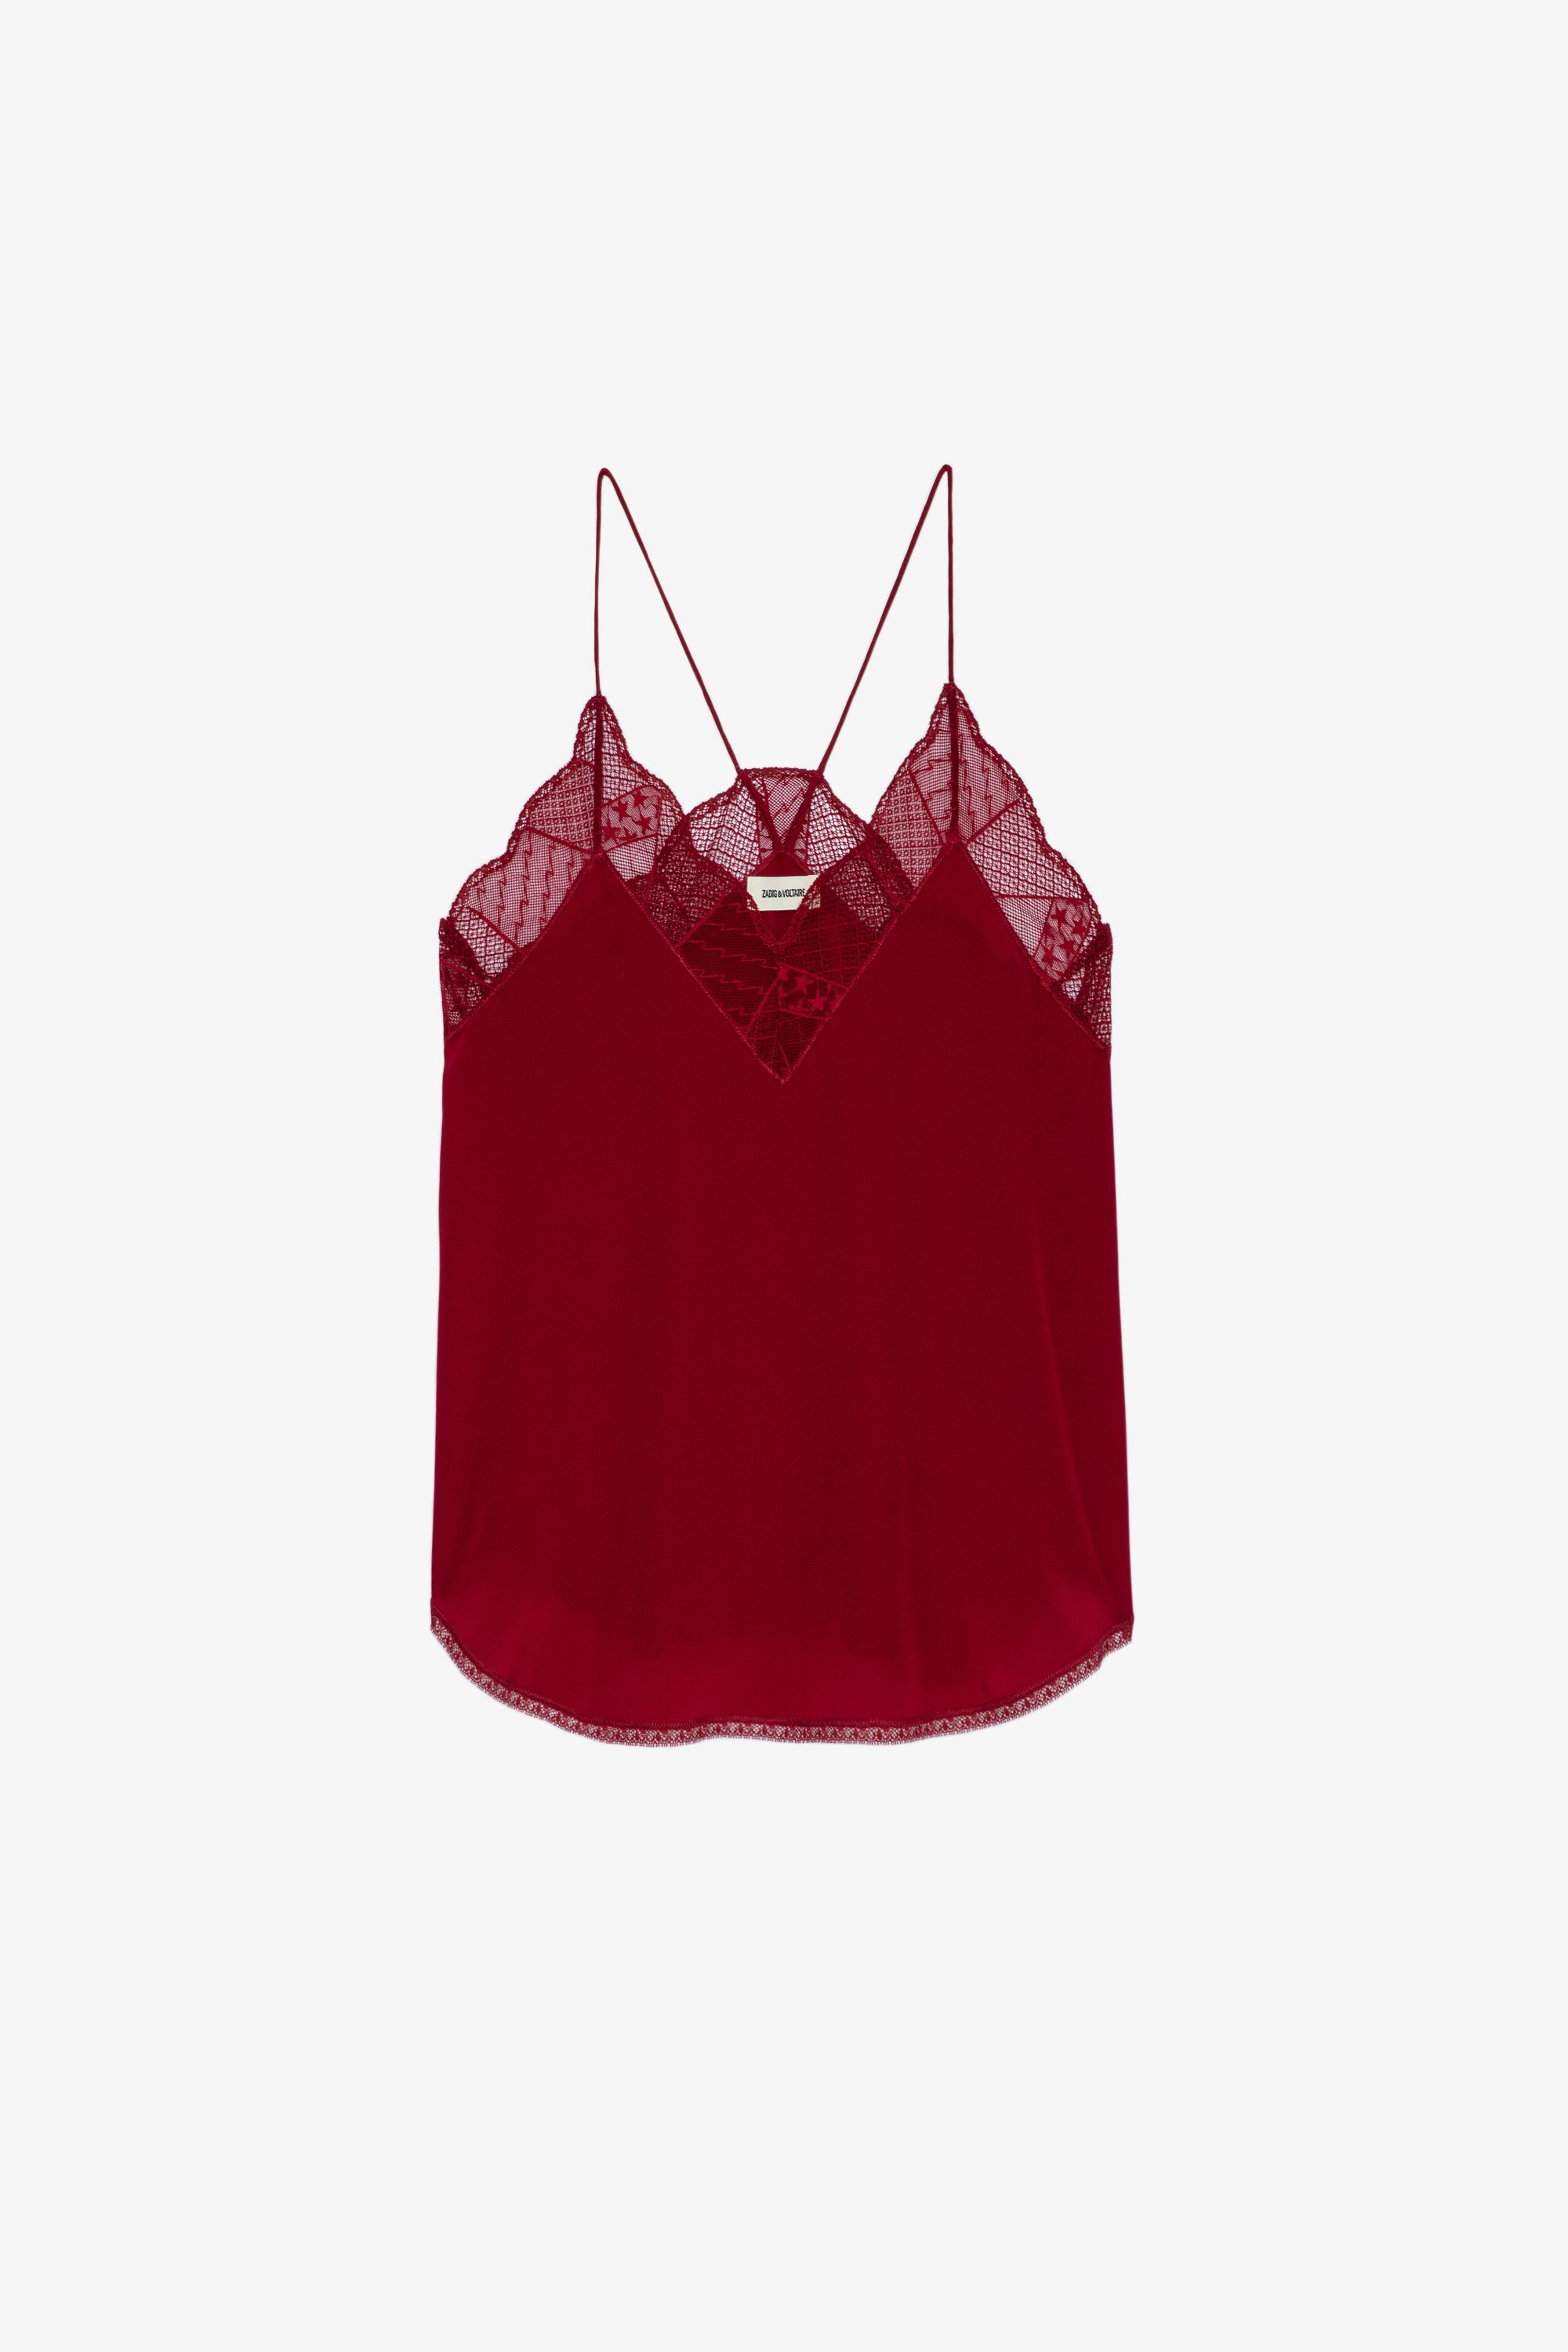 Christy シルク キャミソール Women’s silk camisole with lace trim
